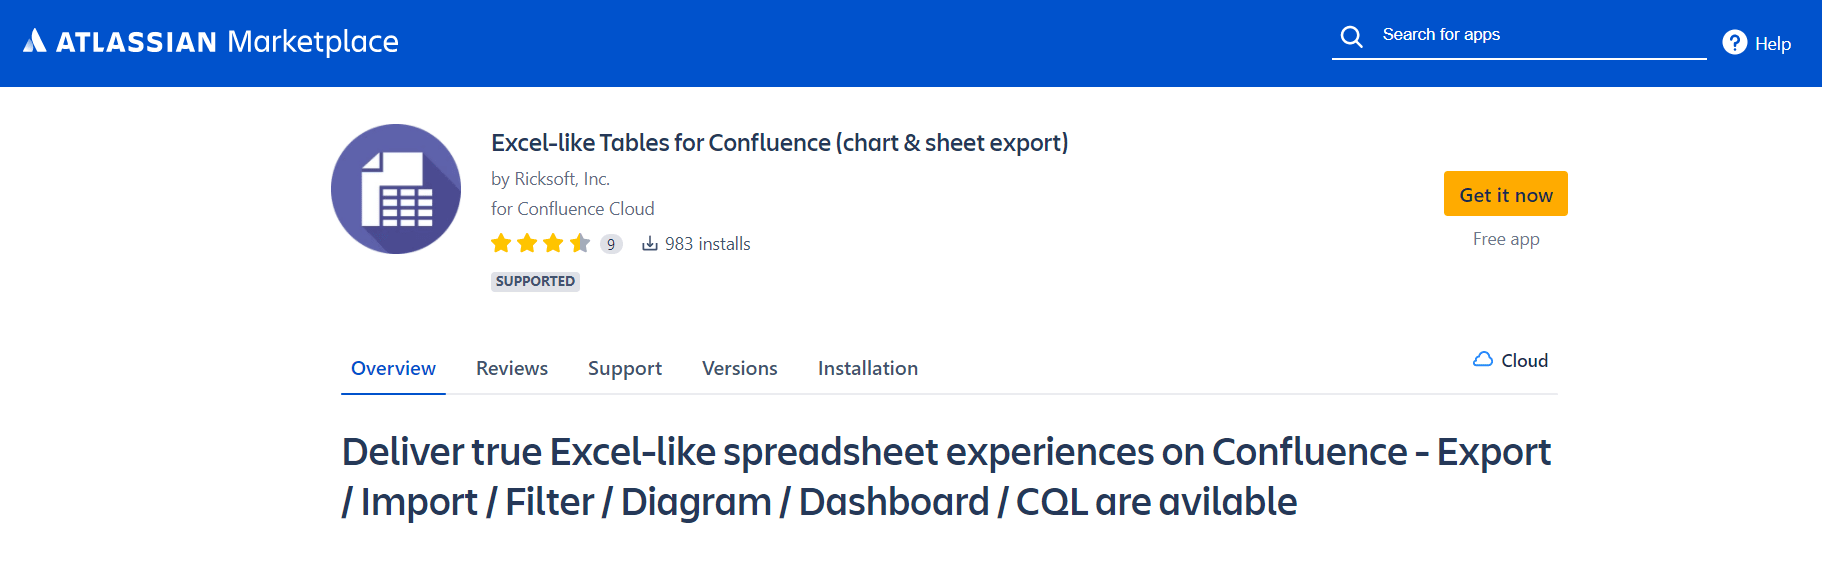 Excel-like Tables for Confluence